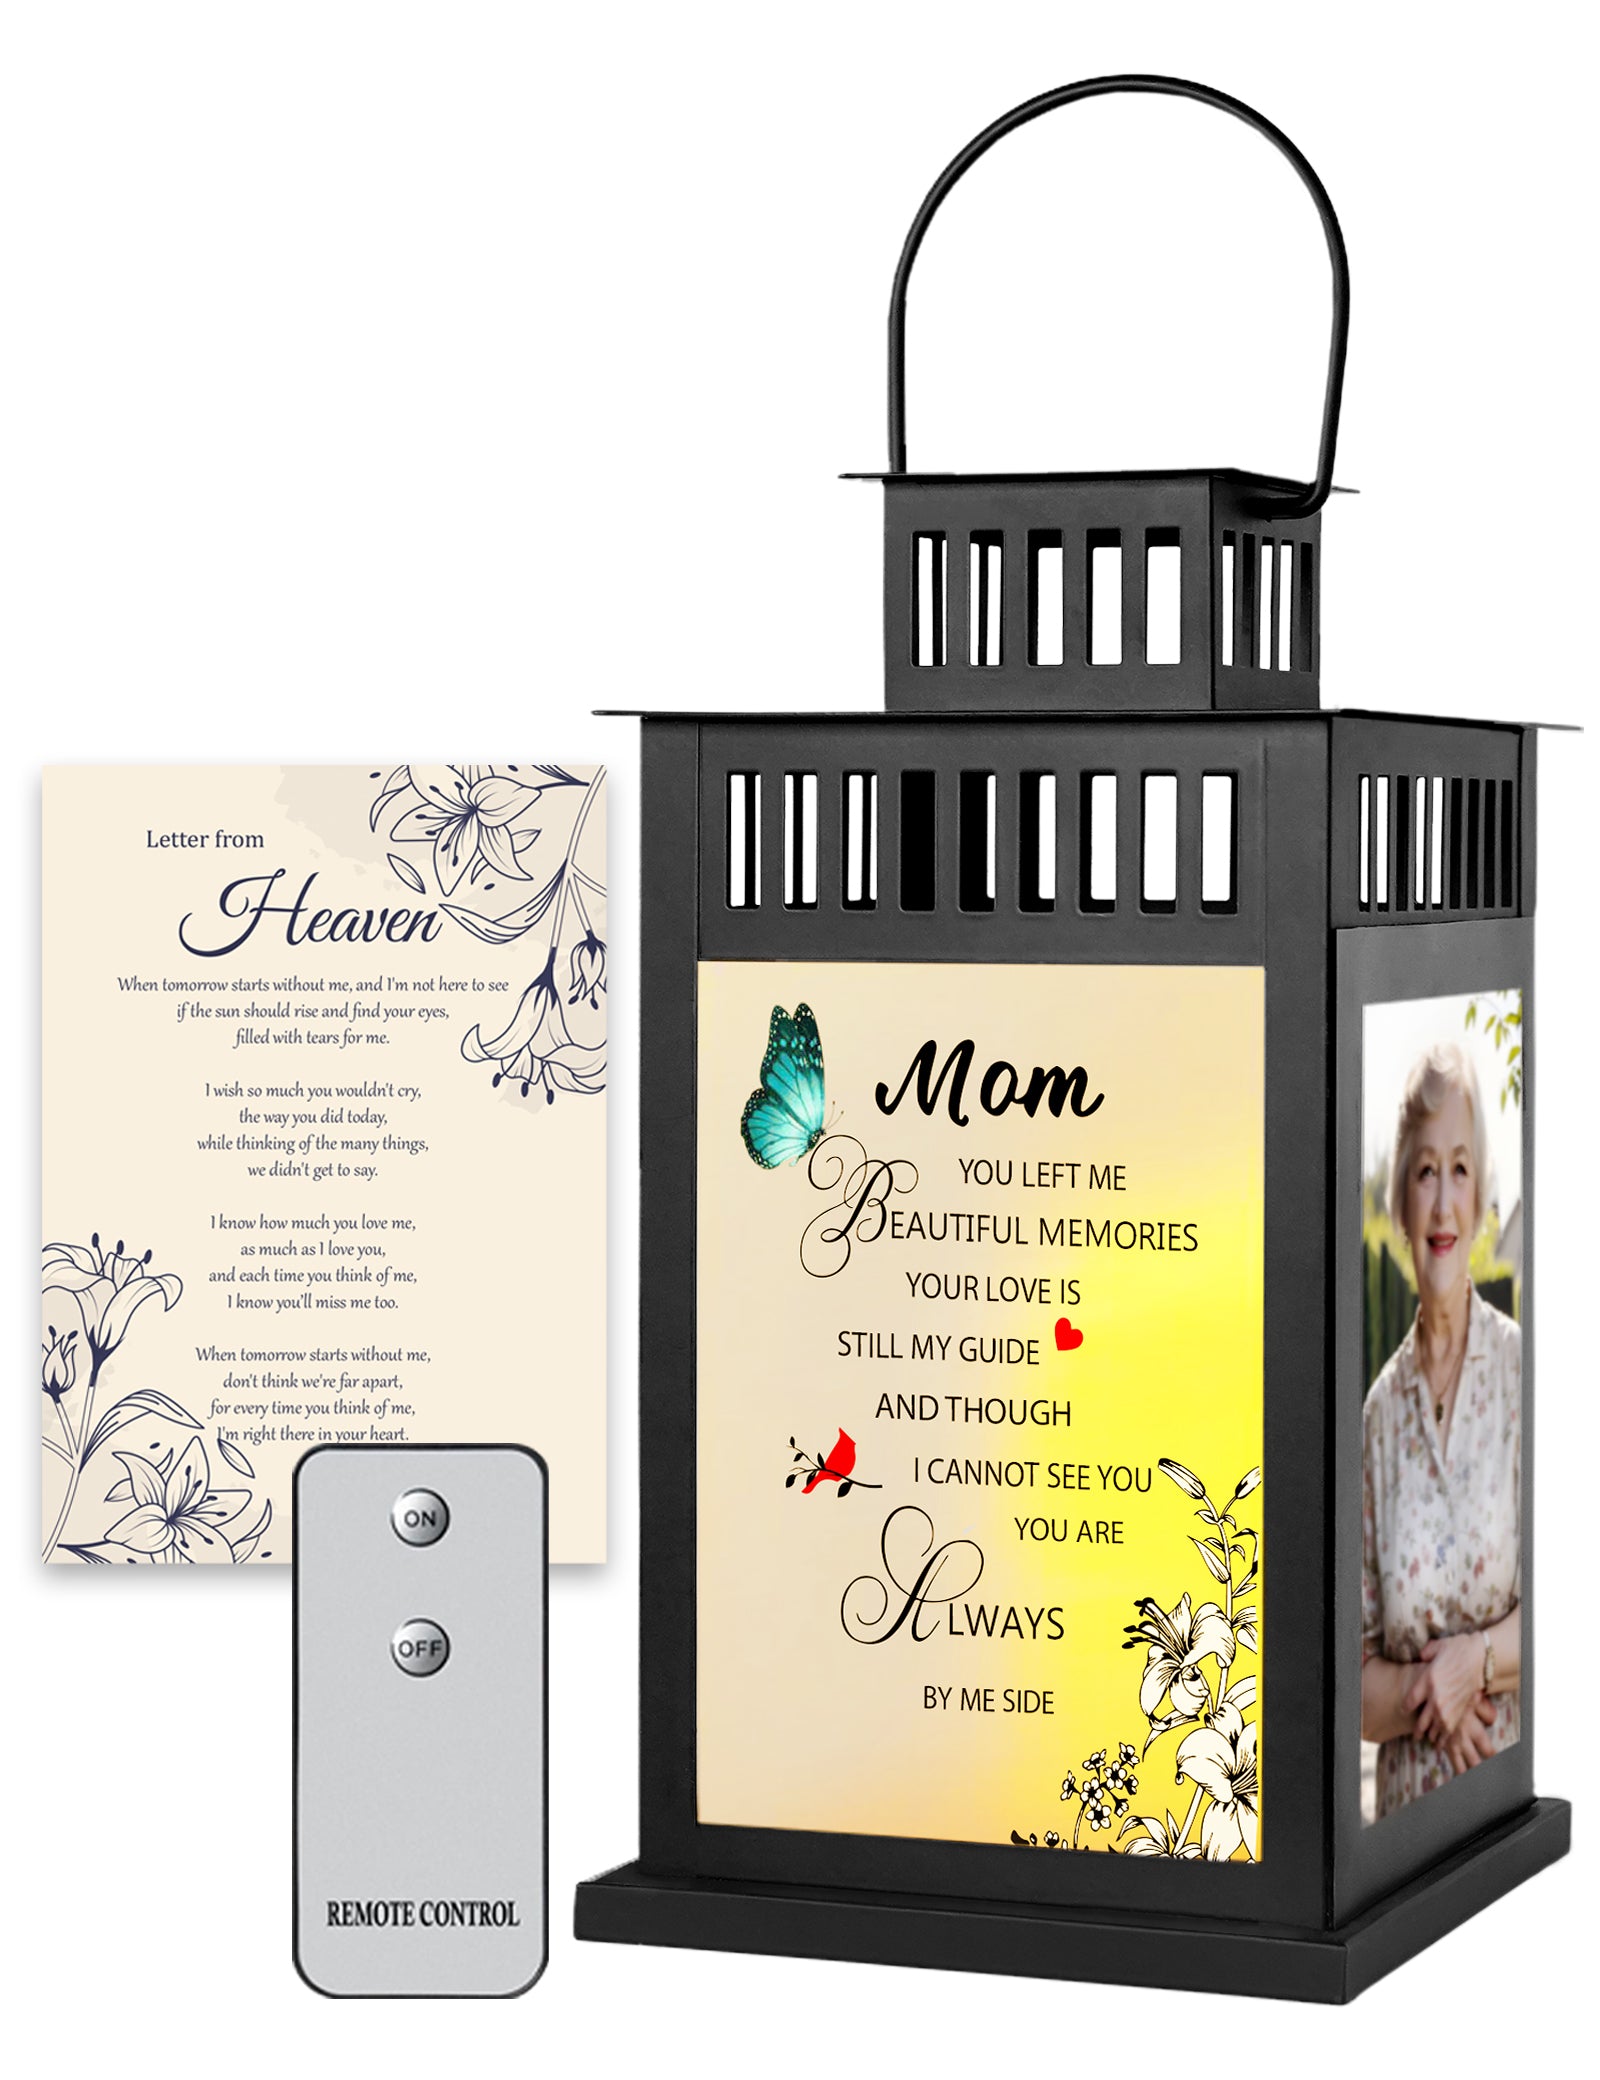 You left me beautiful memories, Sympathy Gift, Memory Lantern for loss of mother